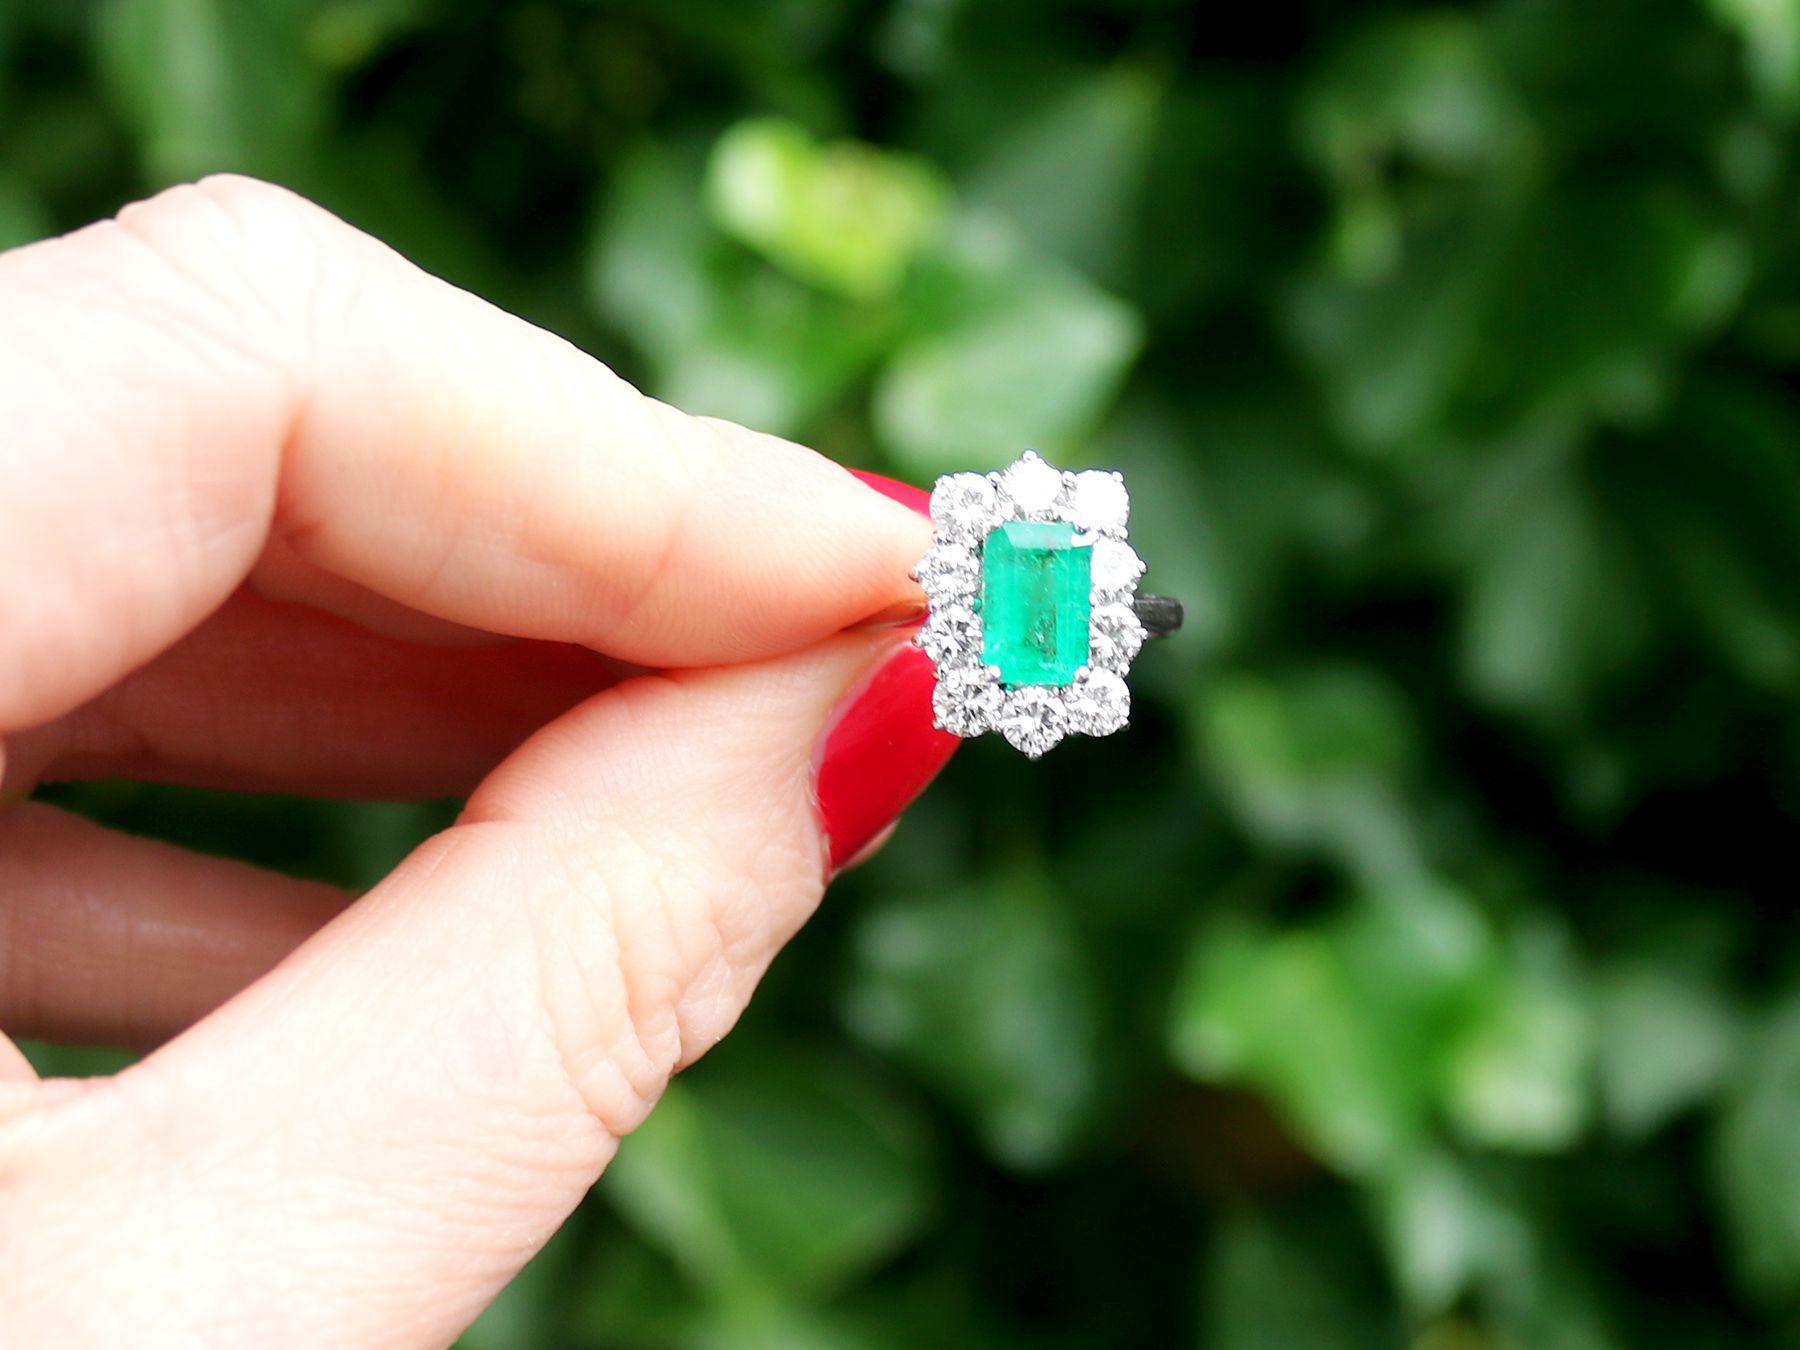 A stunning vintage 1.57 carat natural Zambian emerald and 1.72 carat diamond, 18 karat white gold, platinum set cluster ring; an addition to our vintage jewelry collections

This stunning, fine and impressive emerald cluster ring has been crafted in